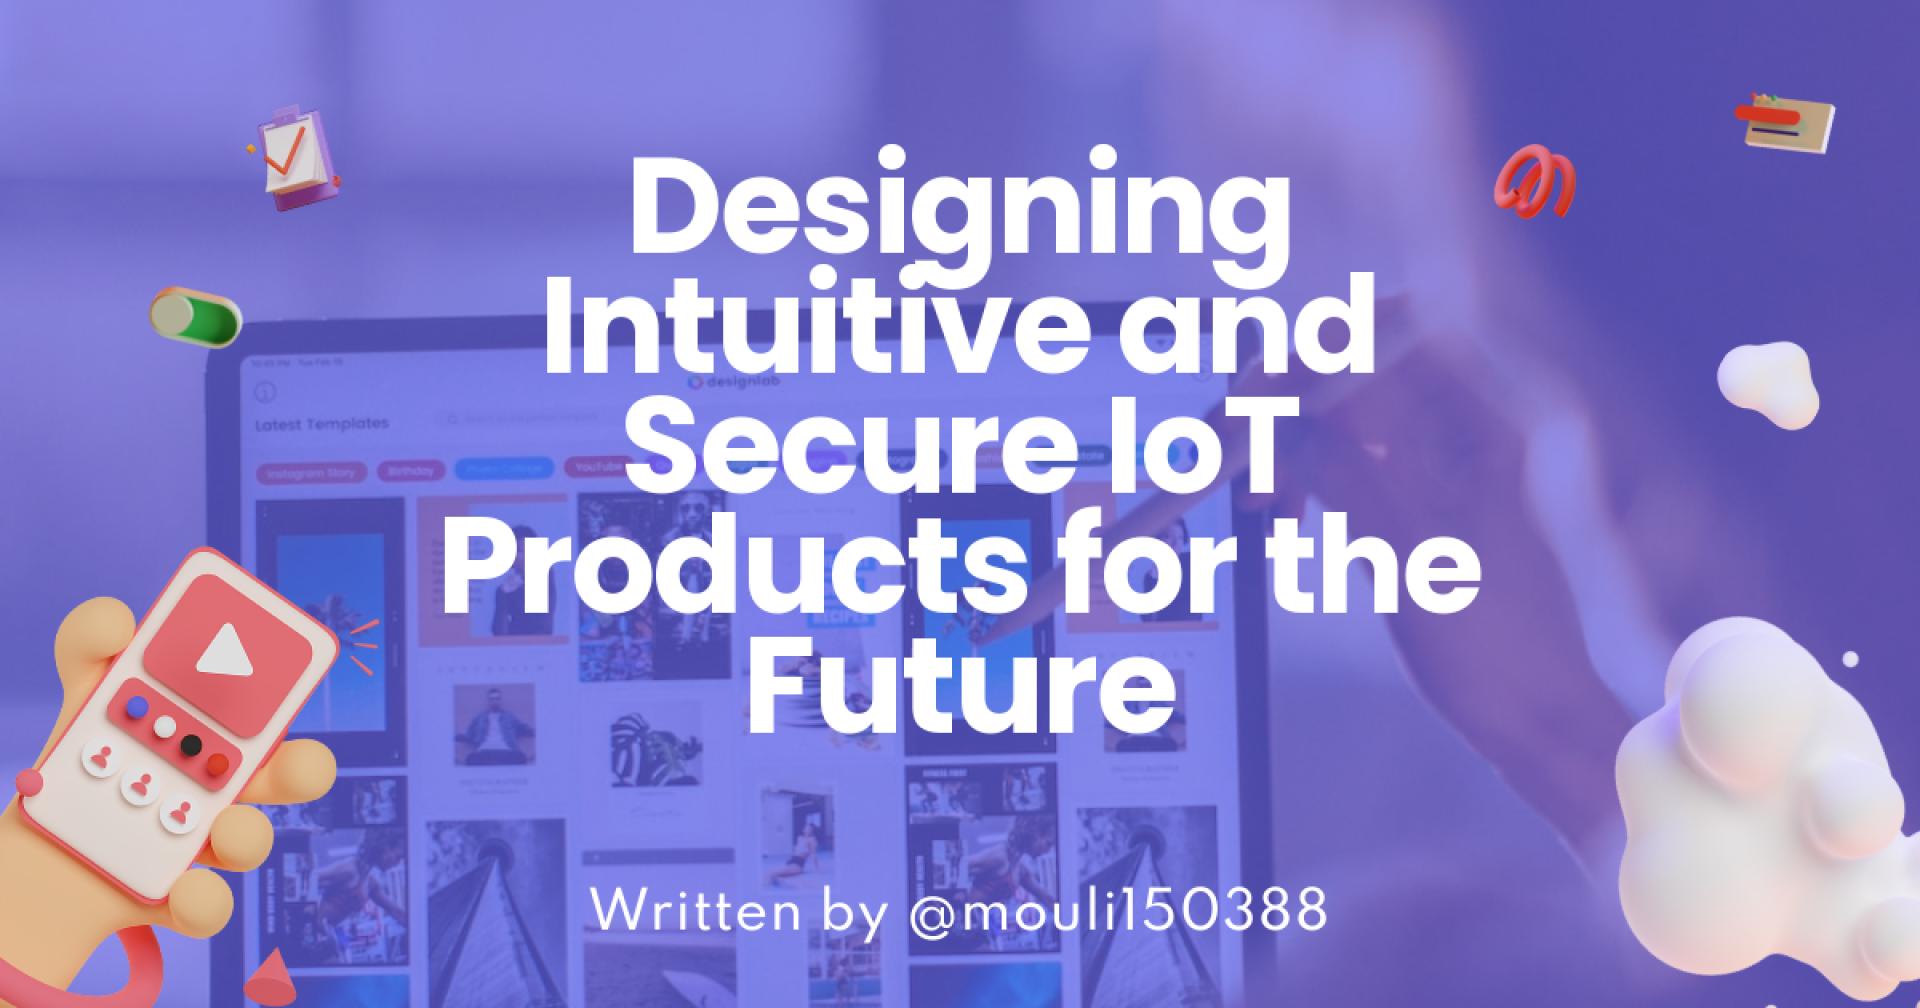 Designing Intuitive and Secure IoT Products for the Future